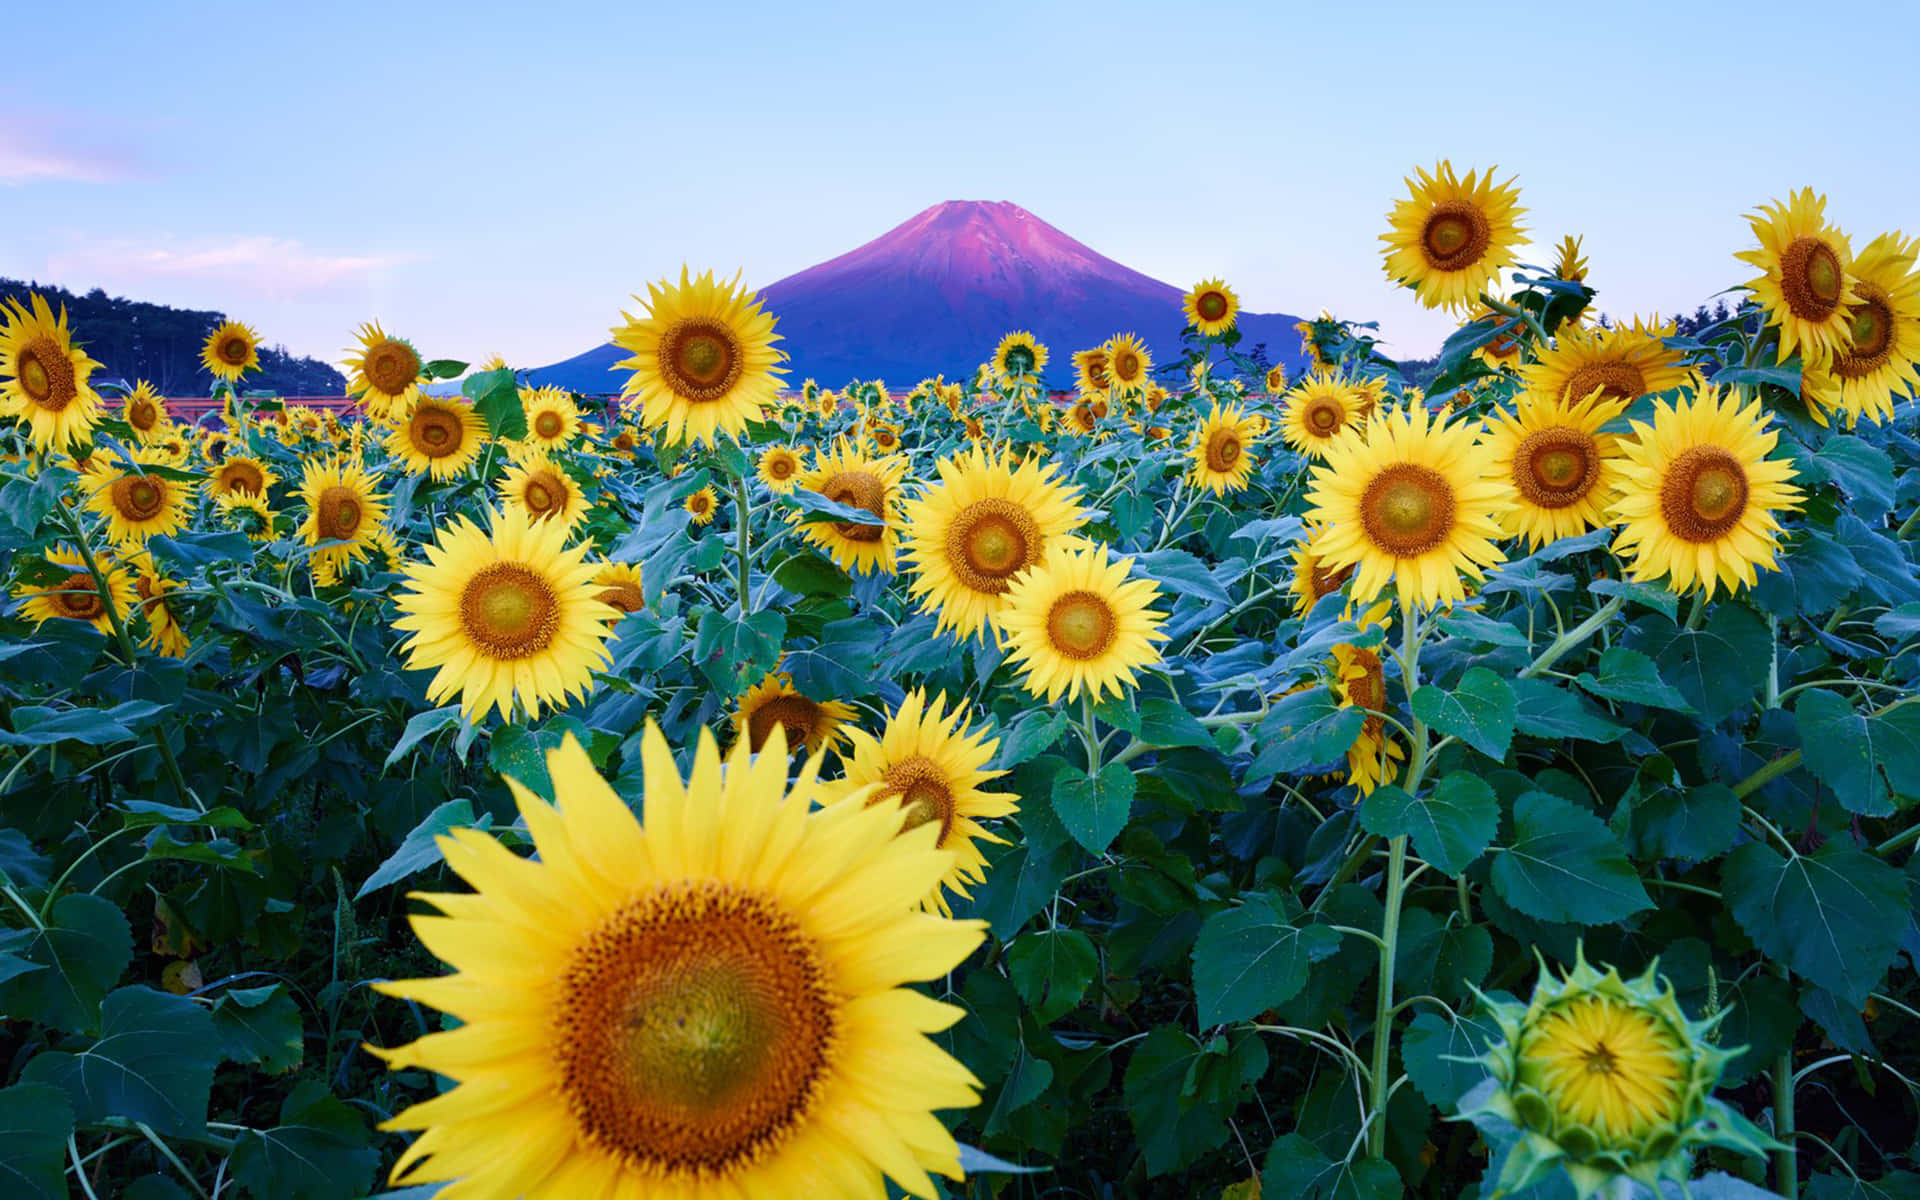 sunflowers in front of a mountain